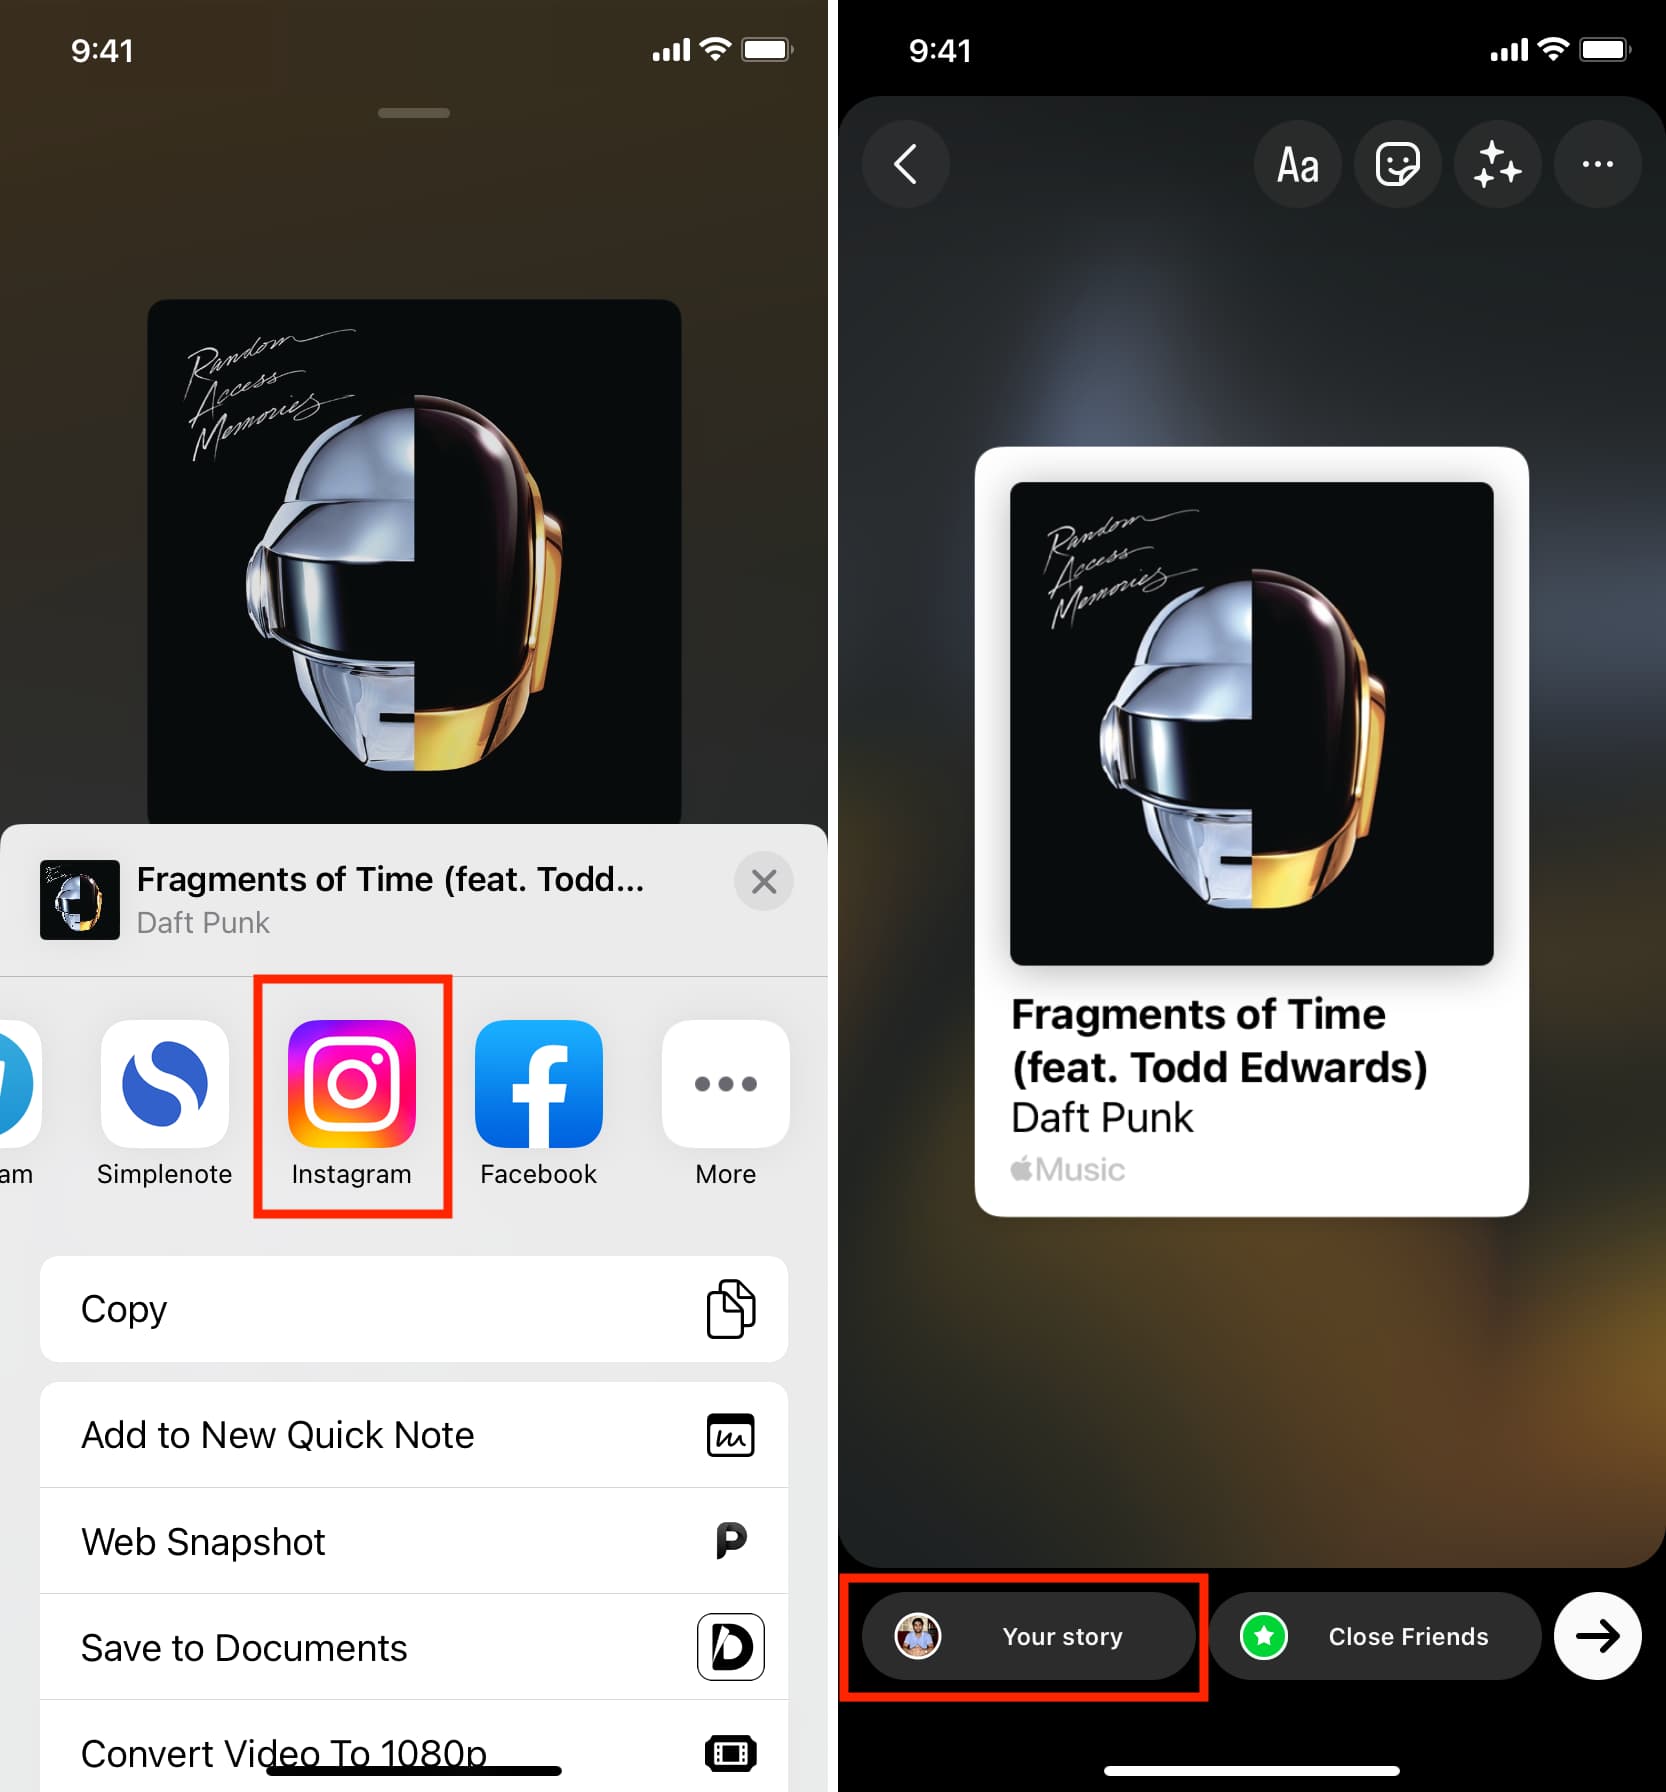 Share Apple Music song to Instagram story